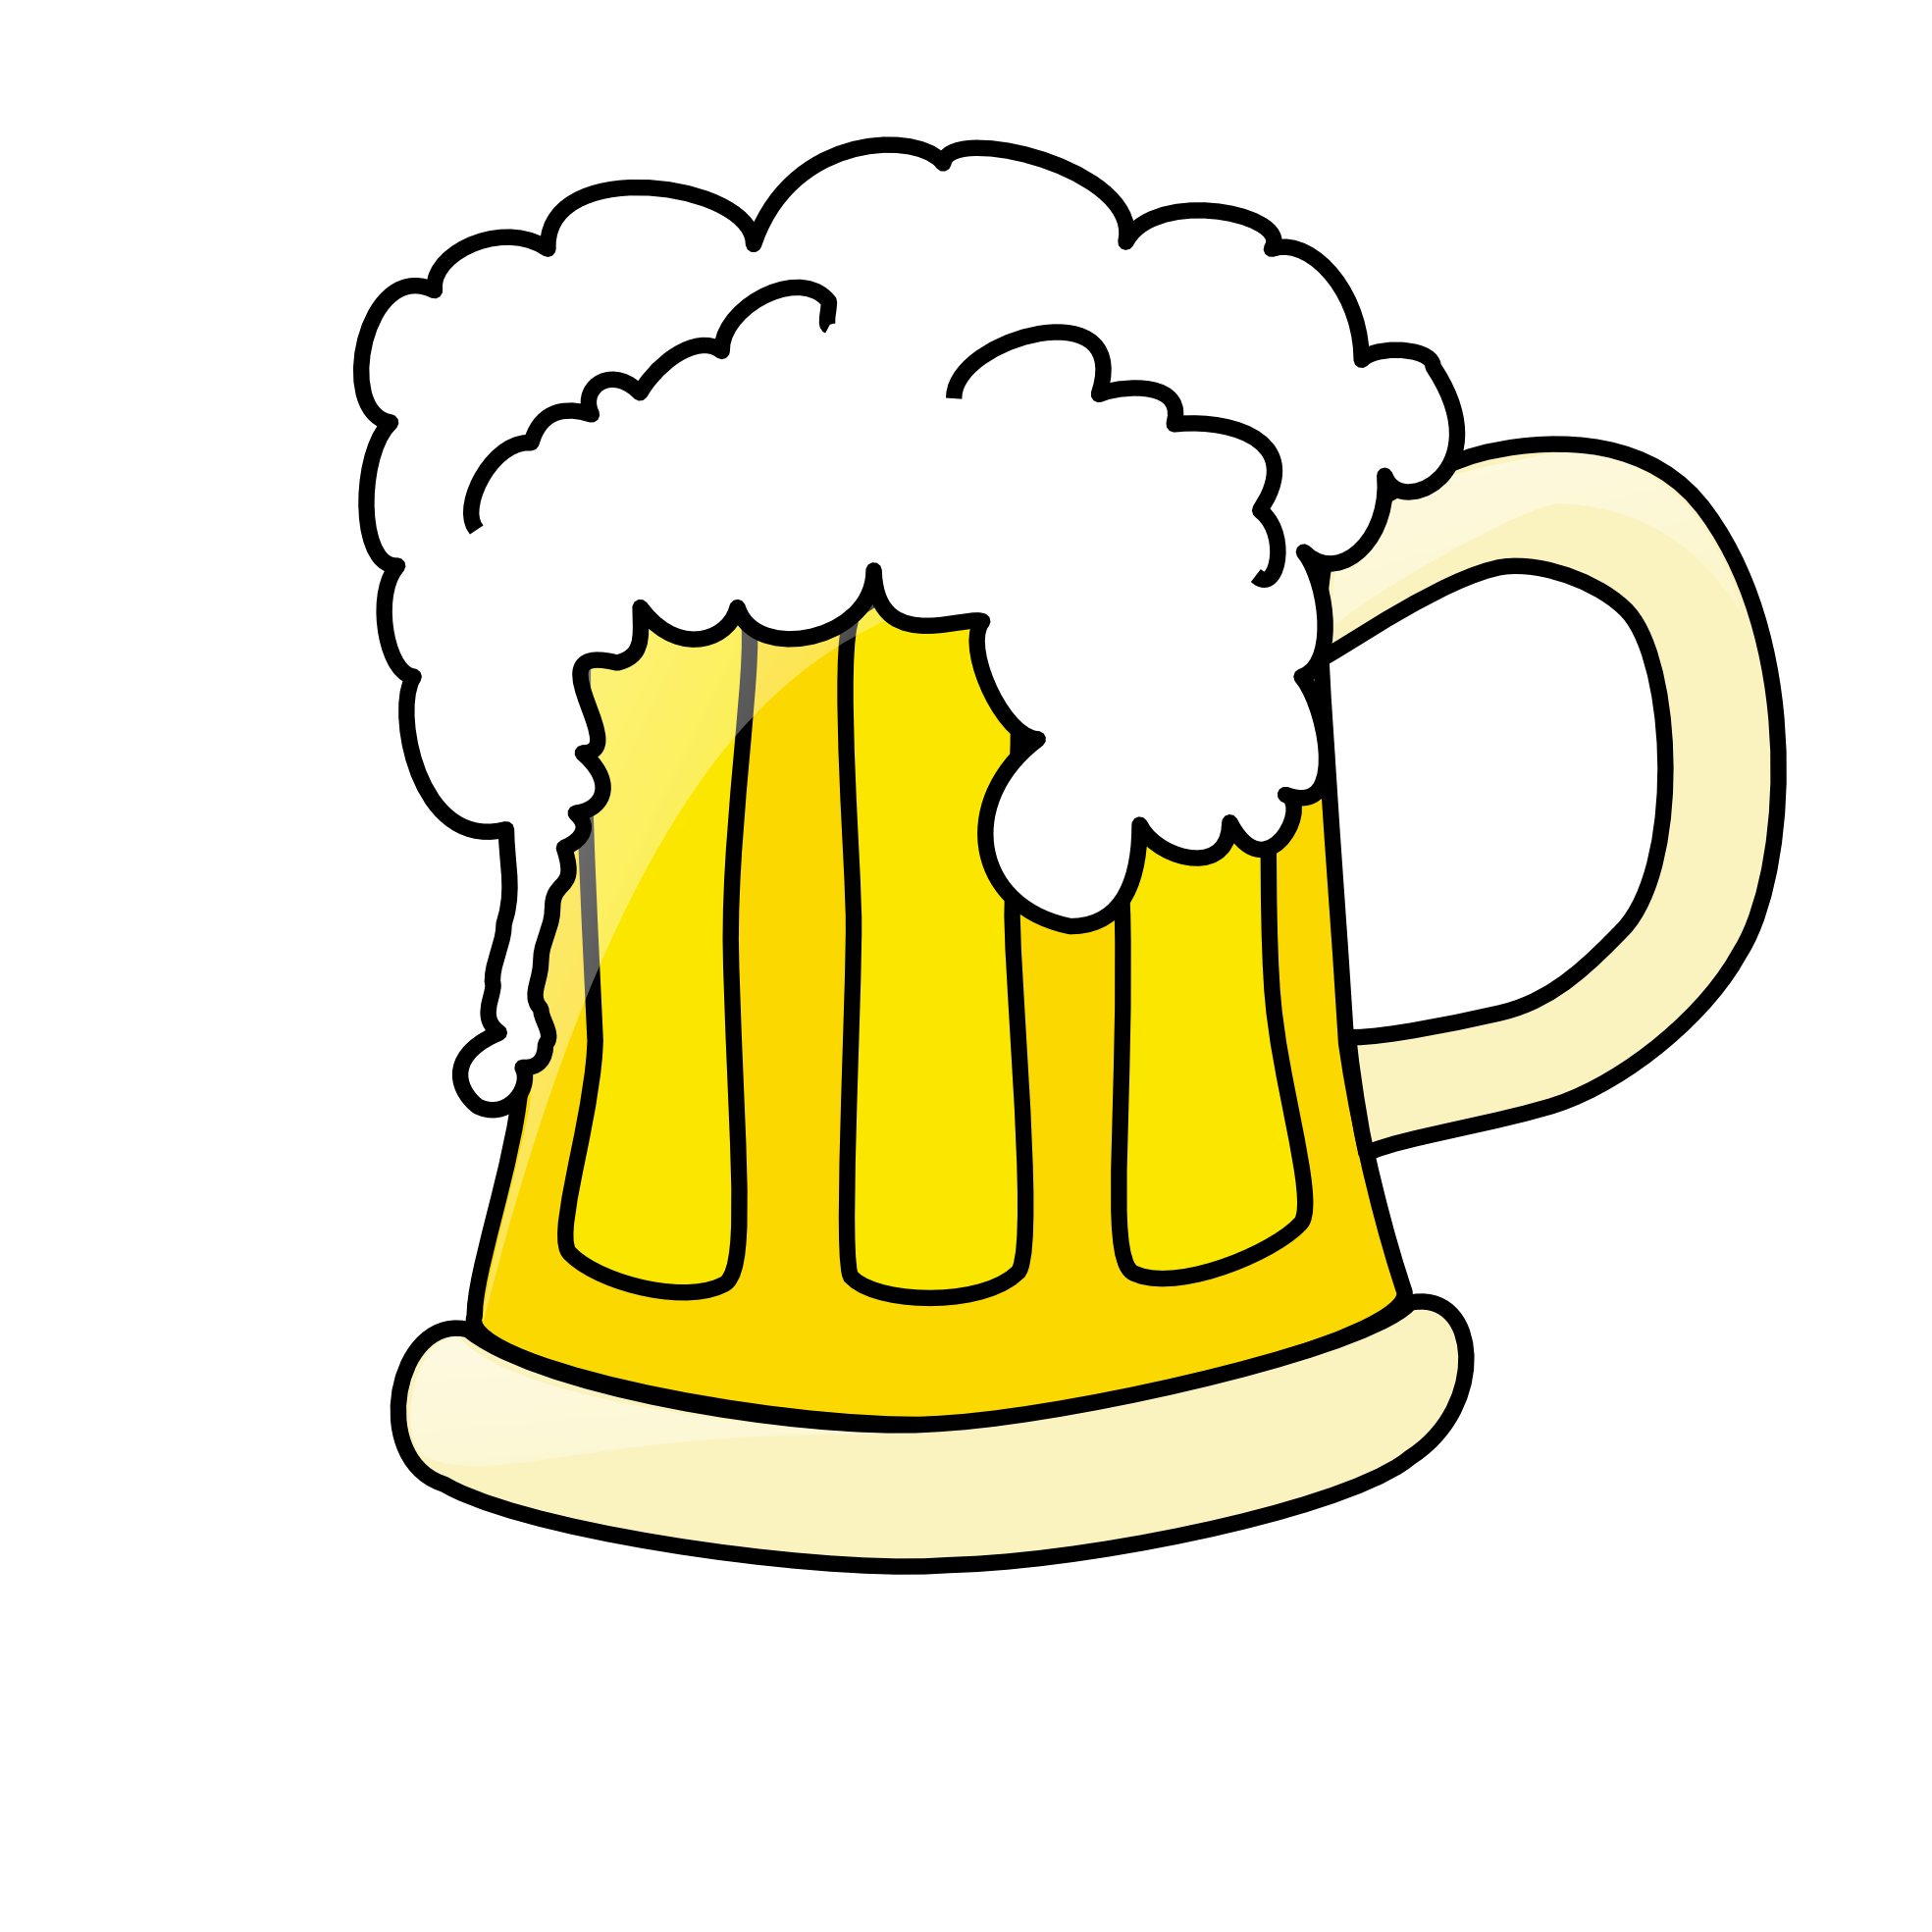 Beer 20clip 20art | Clipart library - Free Clipart Images